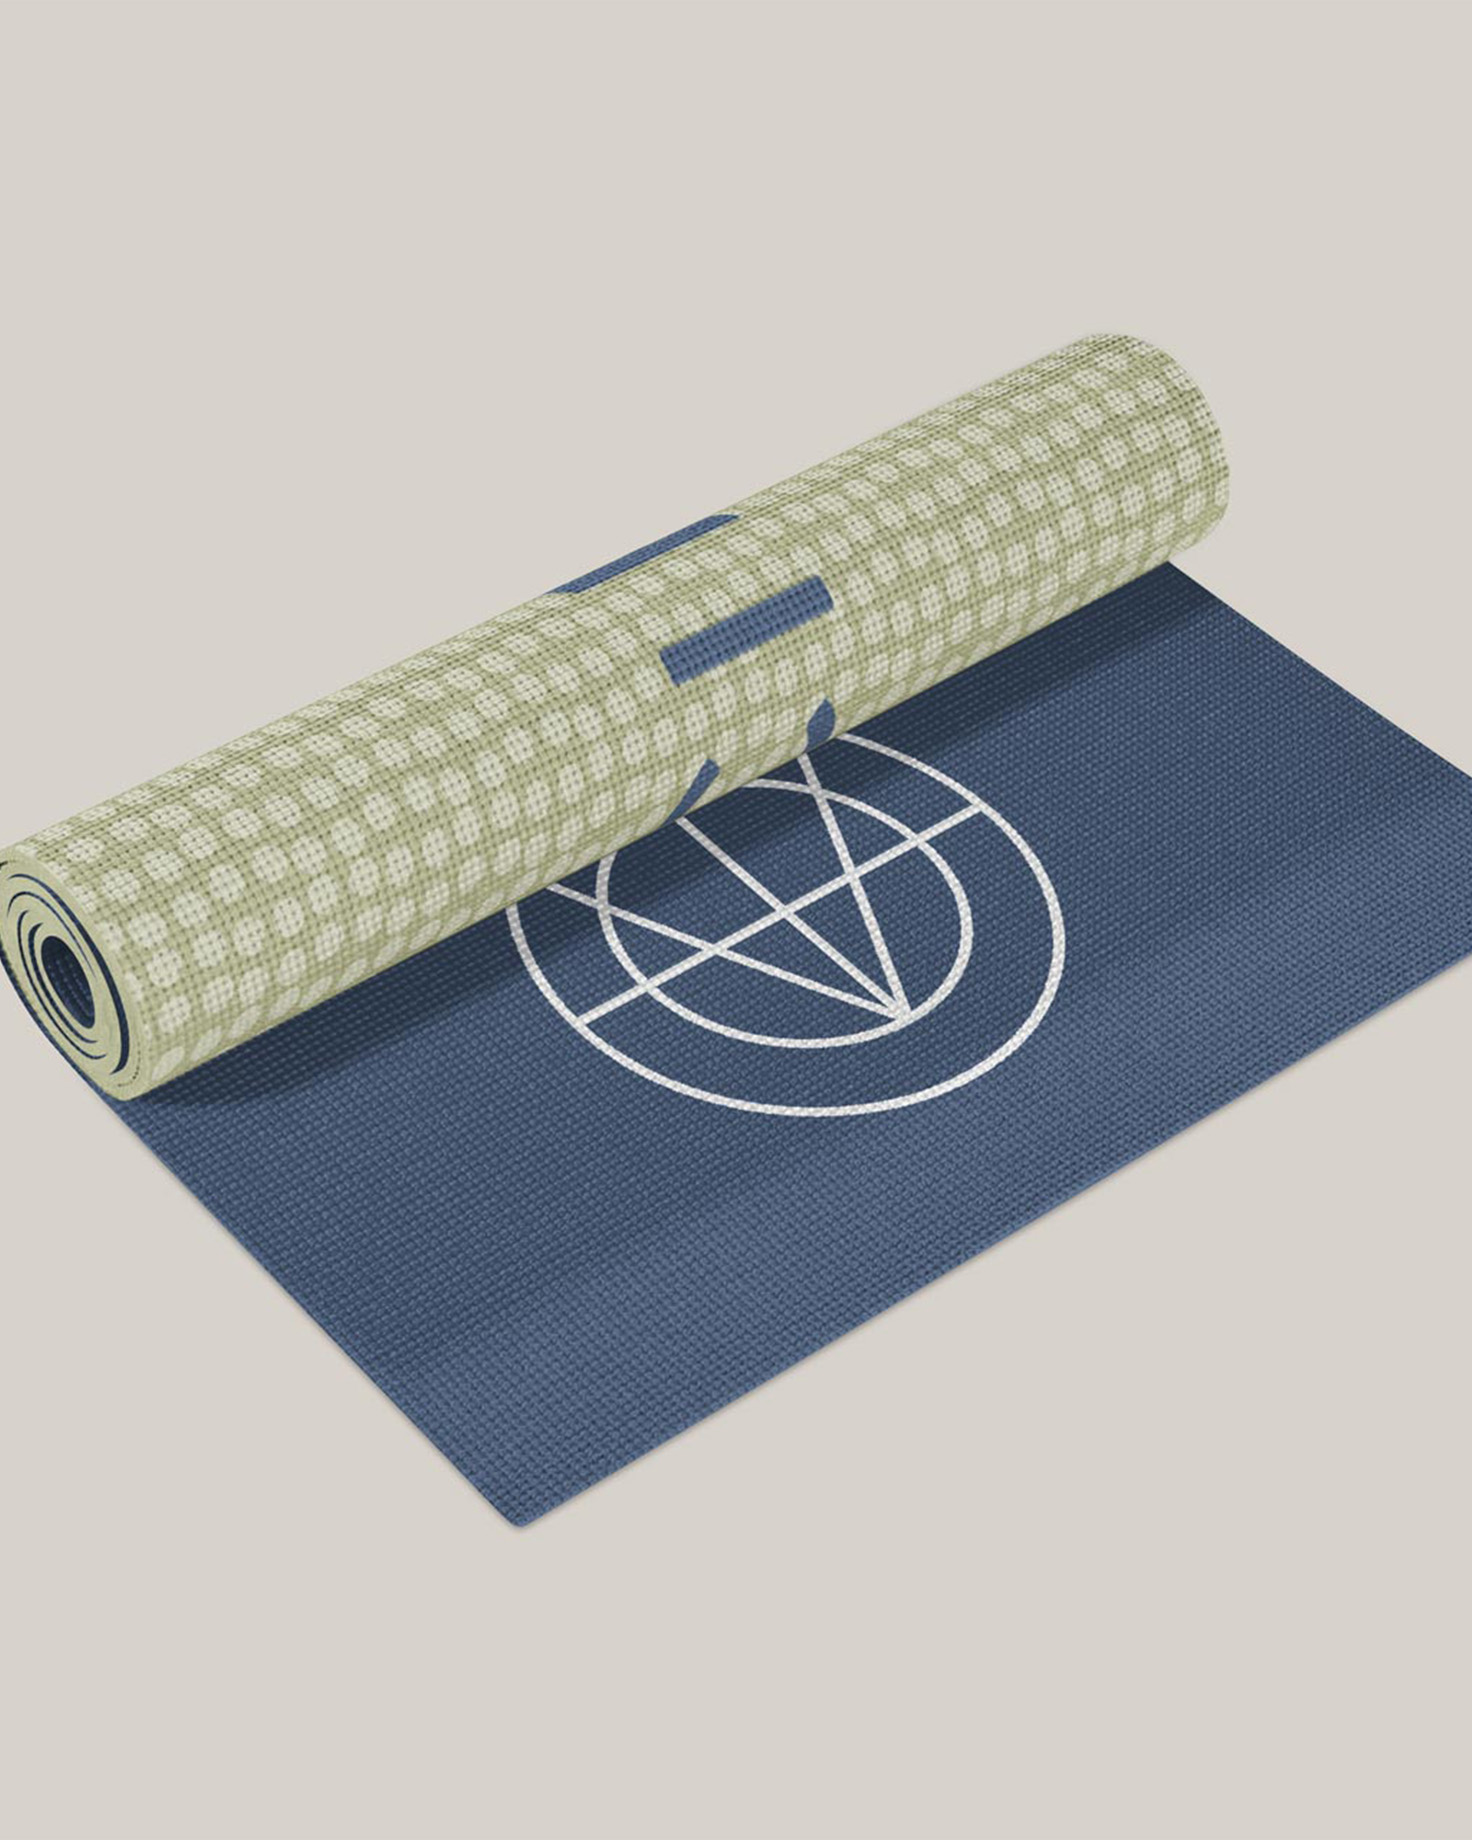 Yoga Mat Design mockup for Full Circle Wellness - Whiskey and Red Small Business Branding and Website Design Packages